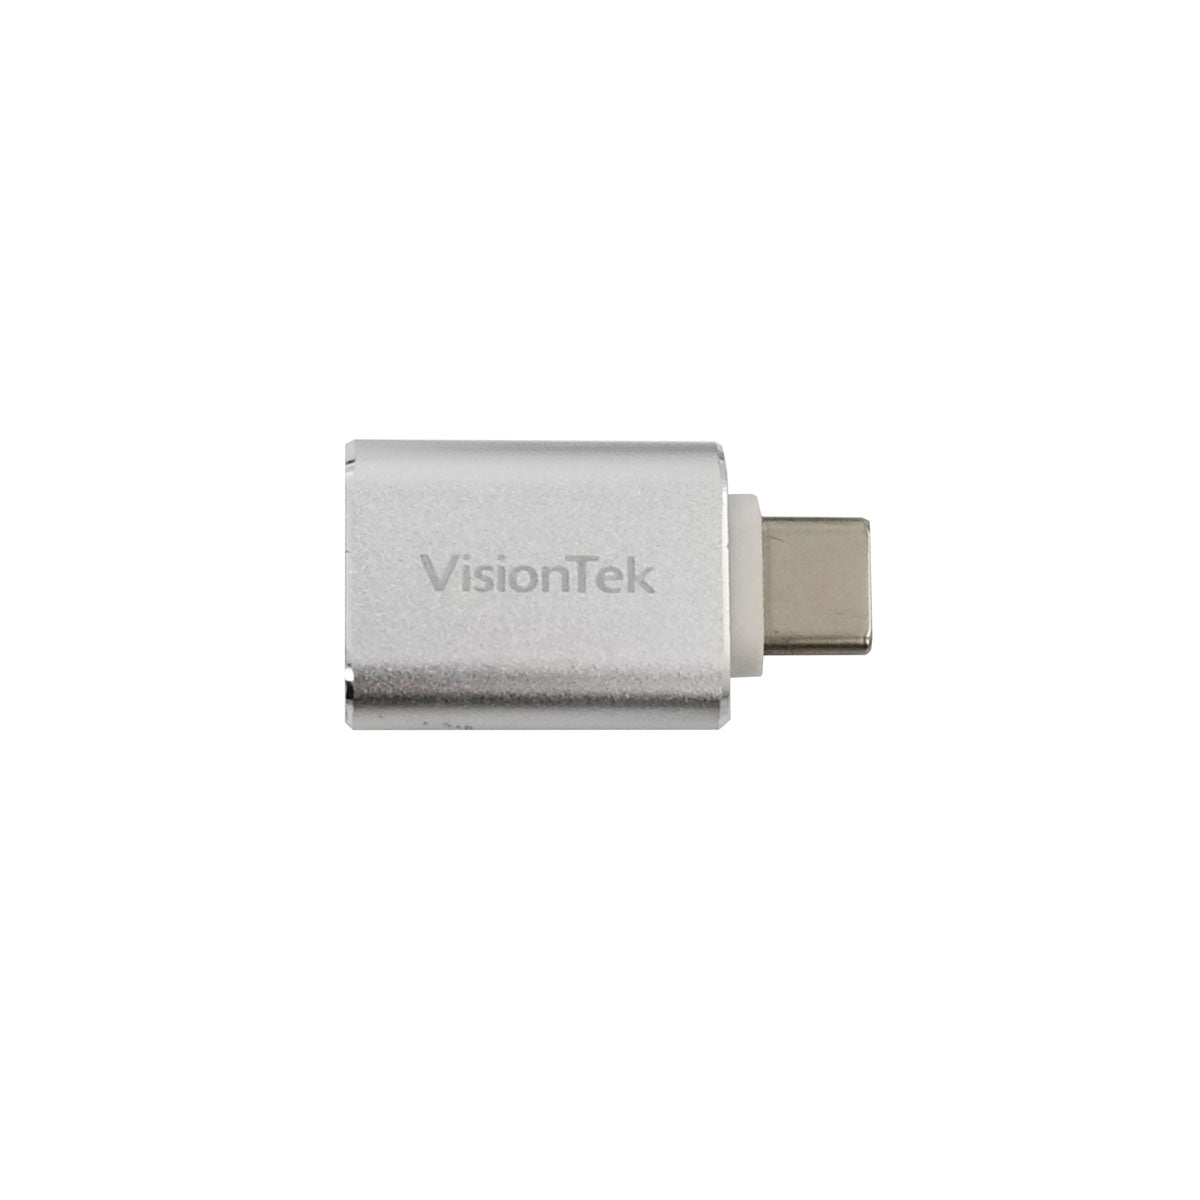 USB-C to USB-A Adapter - M/F - USB 3.0 (5Gbps)